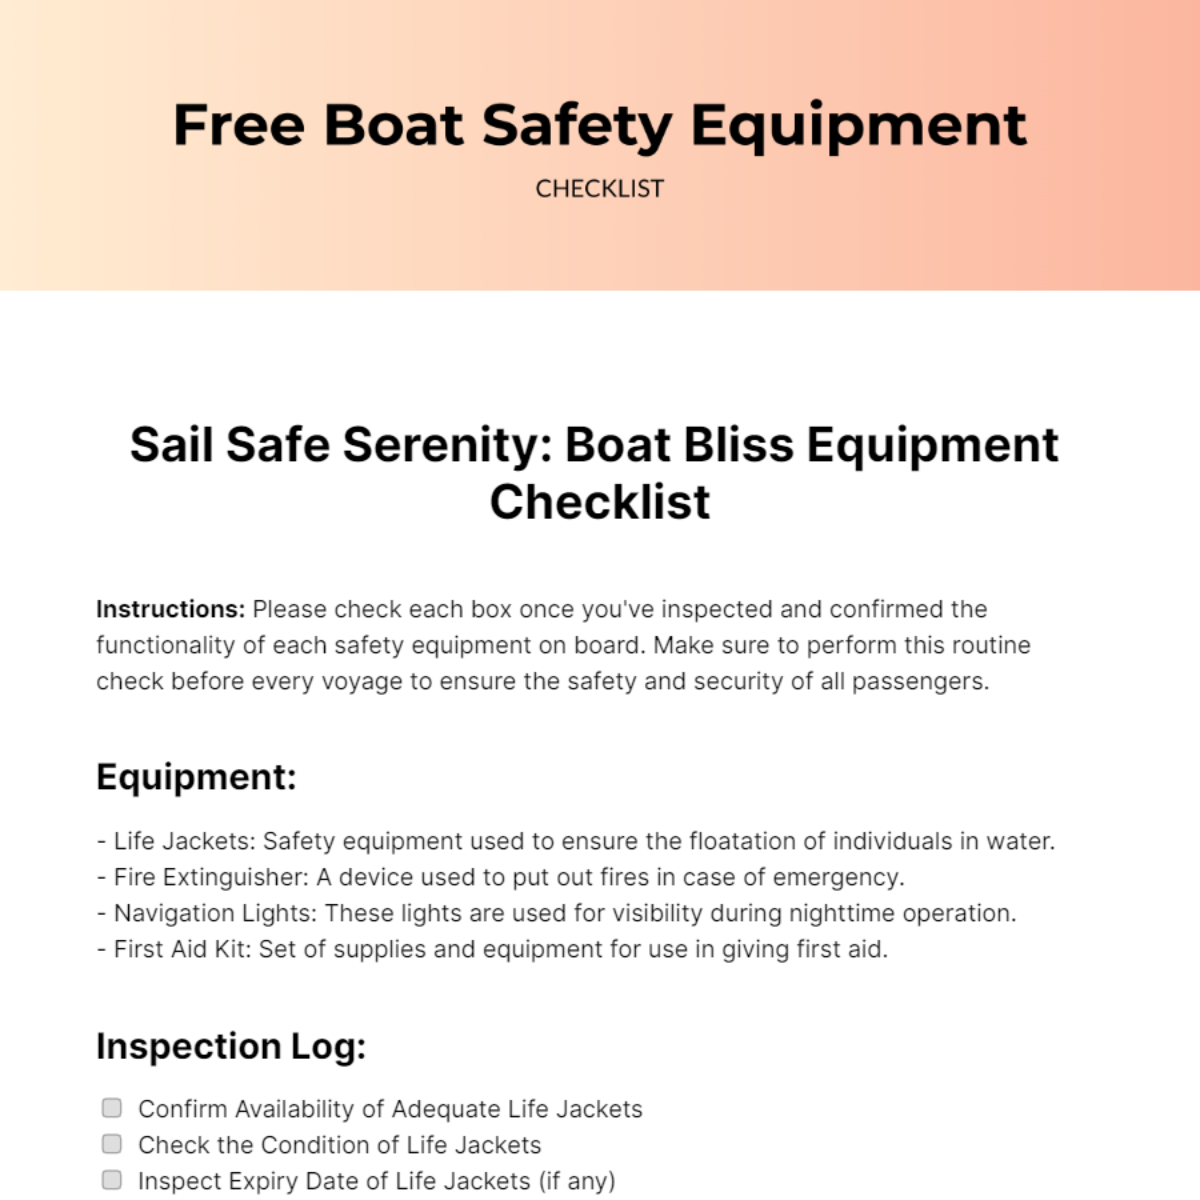 Free Boat Safety Equipment Checklist Template